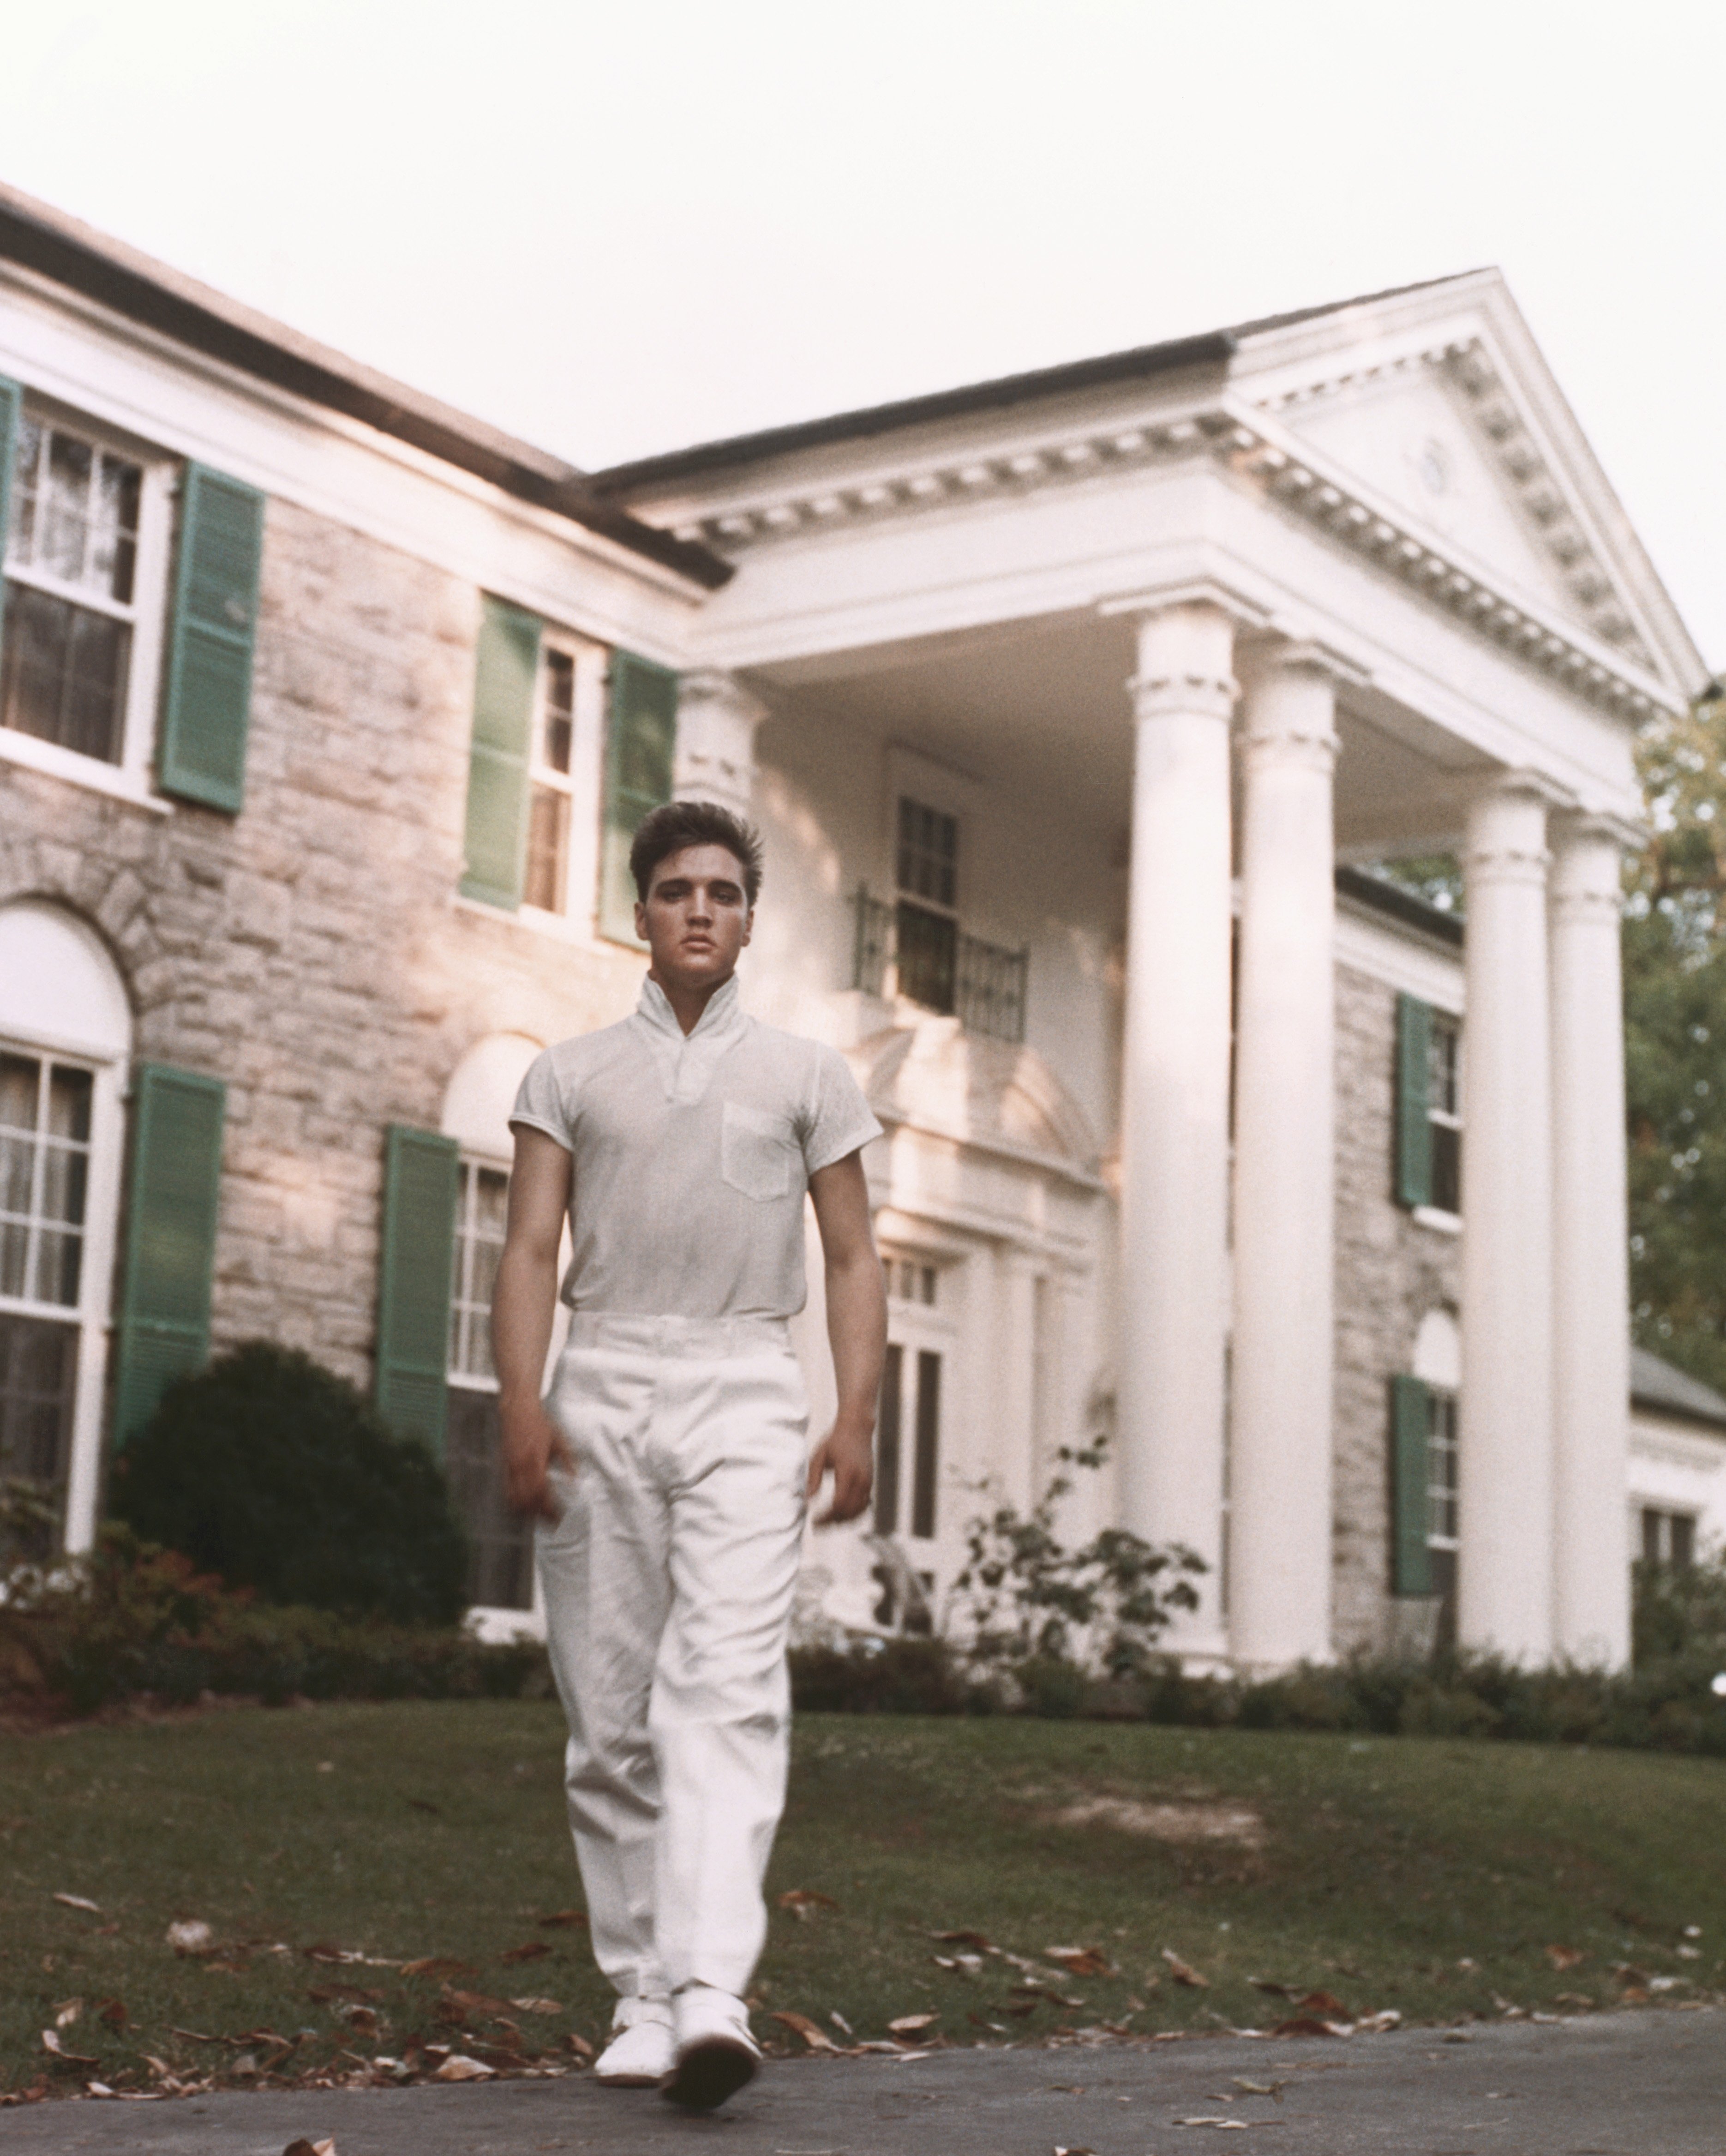 Rock and roll singer Elvis Presley strolls the grounds of his Graceland estate in circa 1957 | Source: Getty Images 